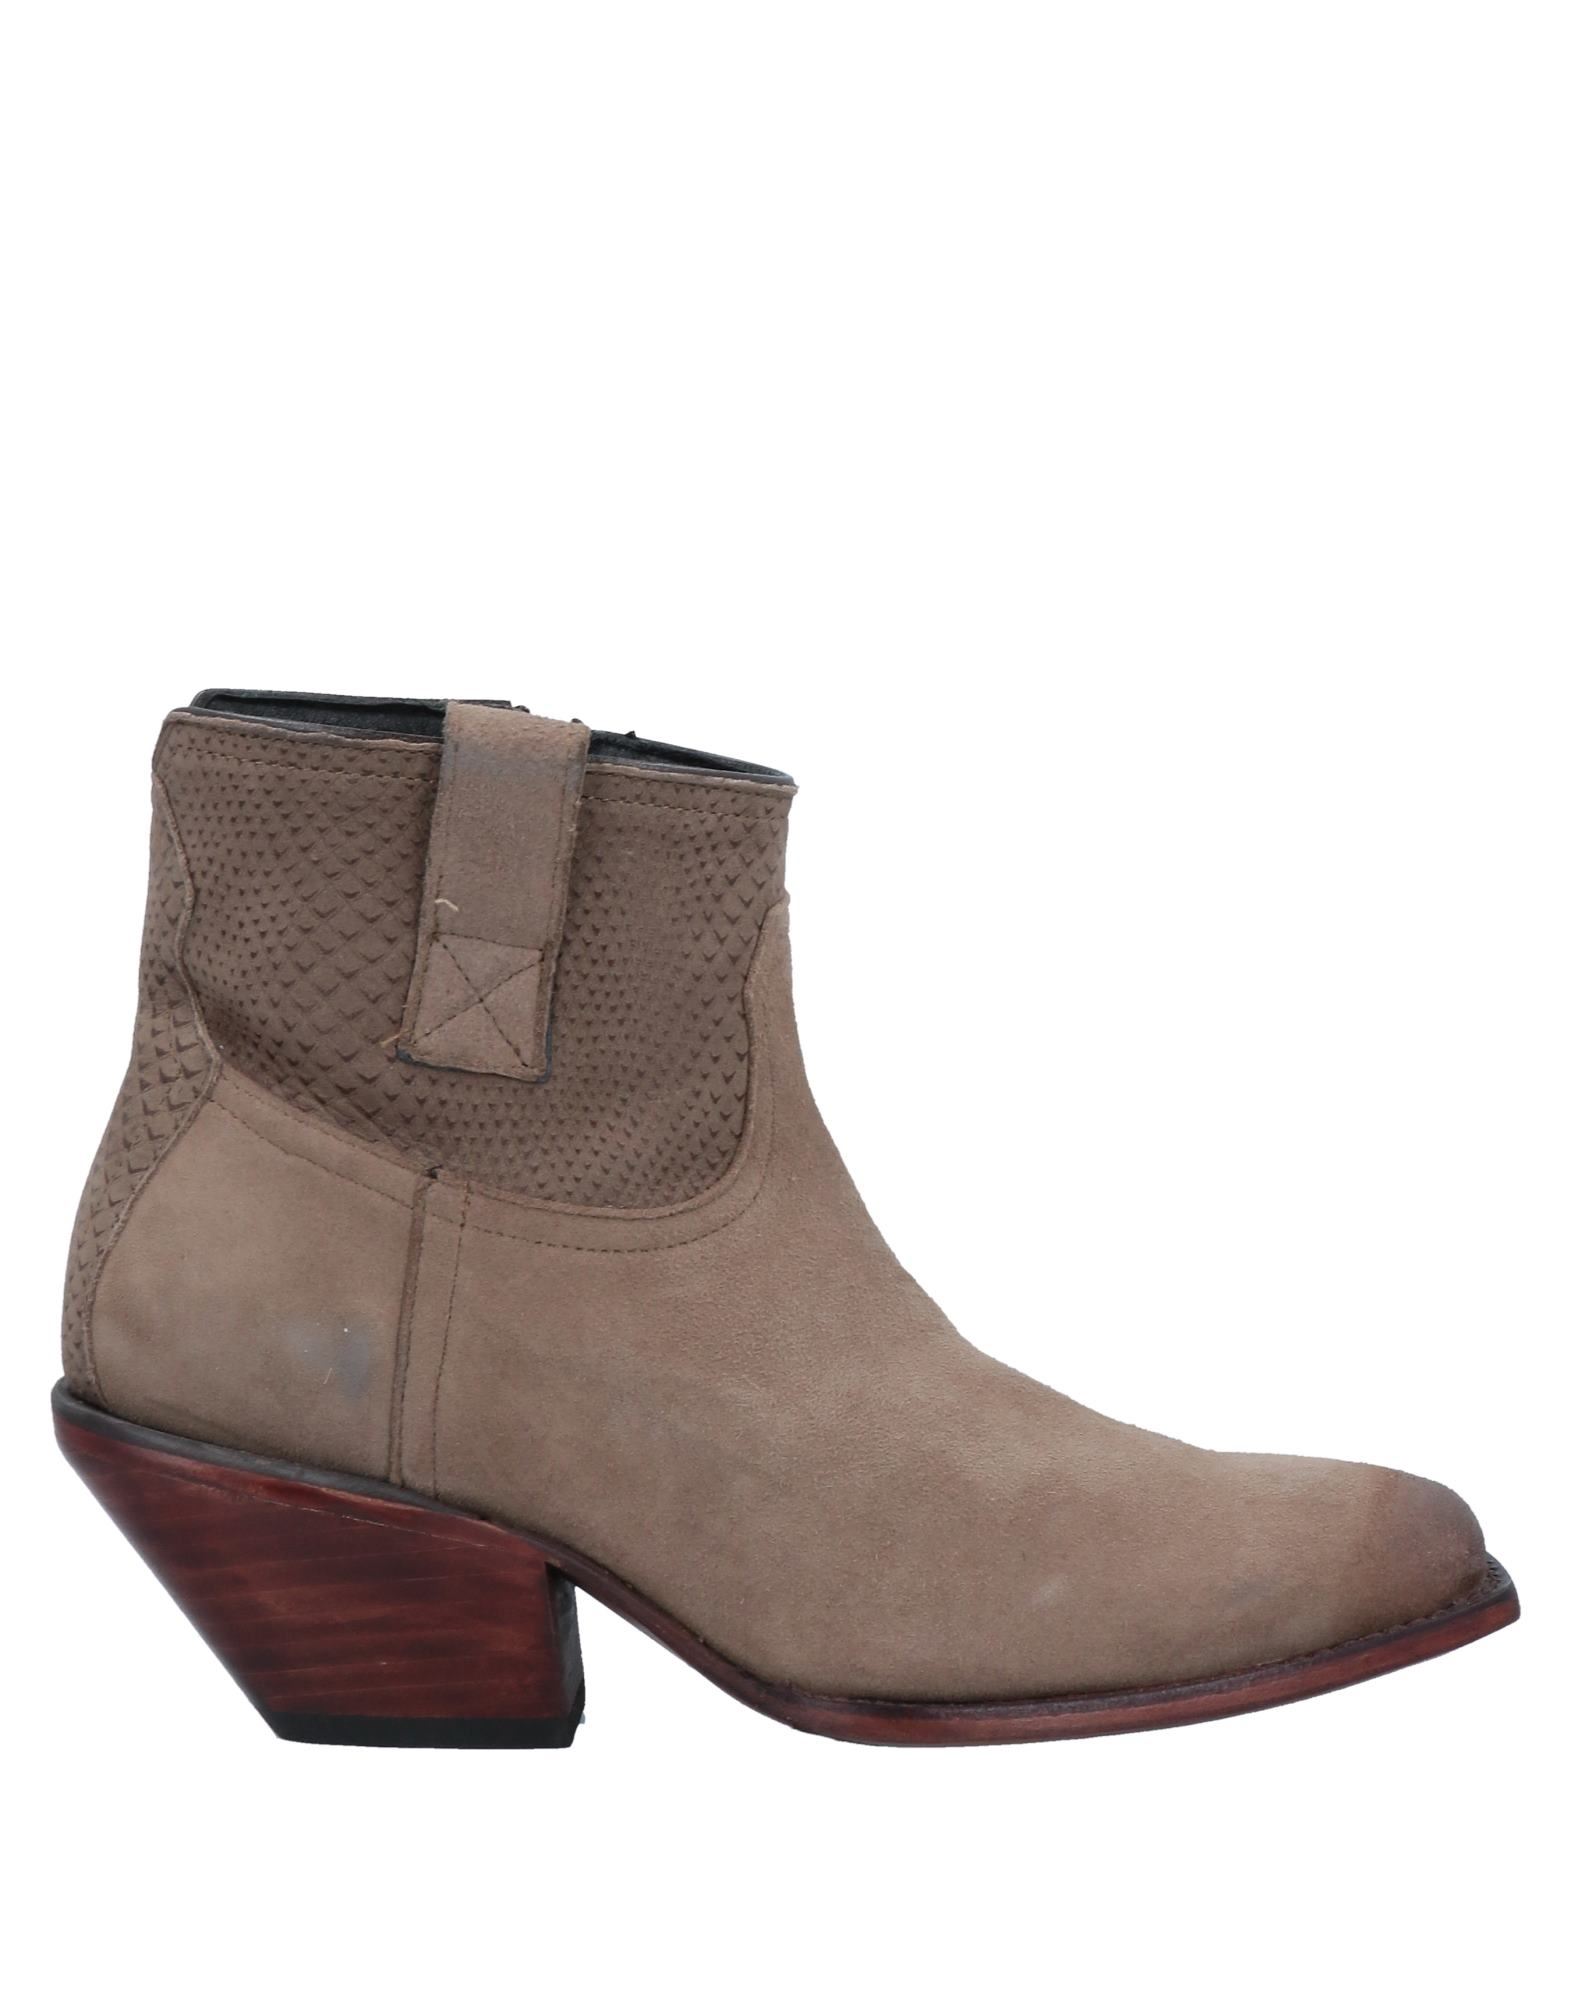 Mexicana Ankle Boots In Khaki